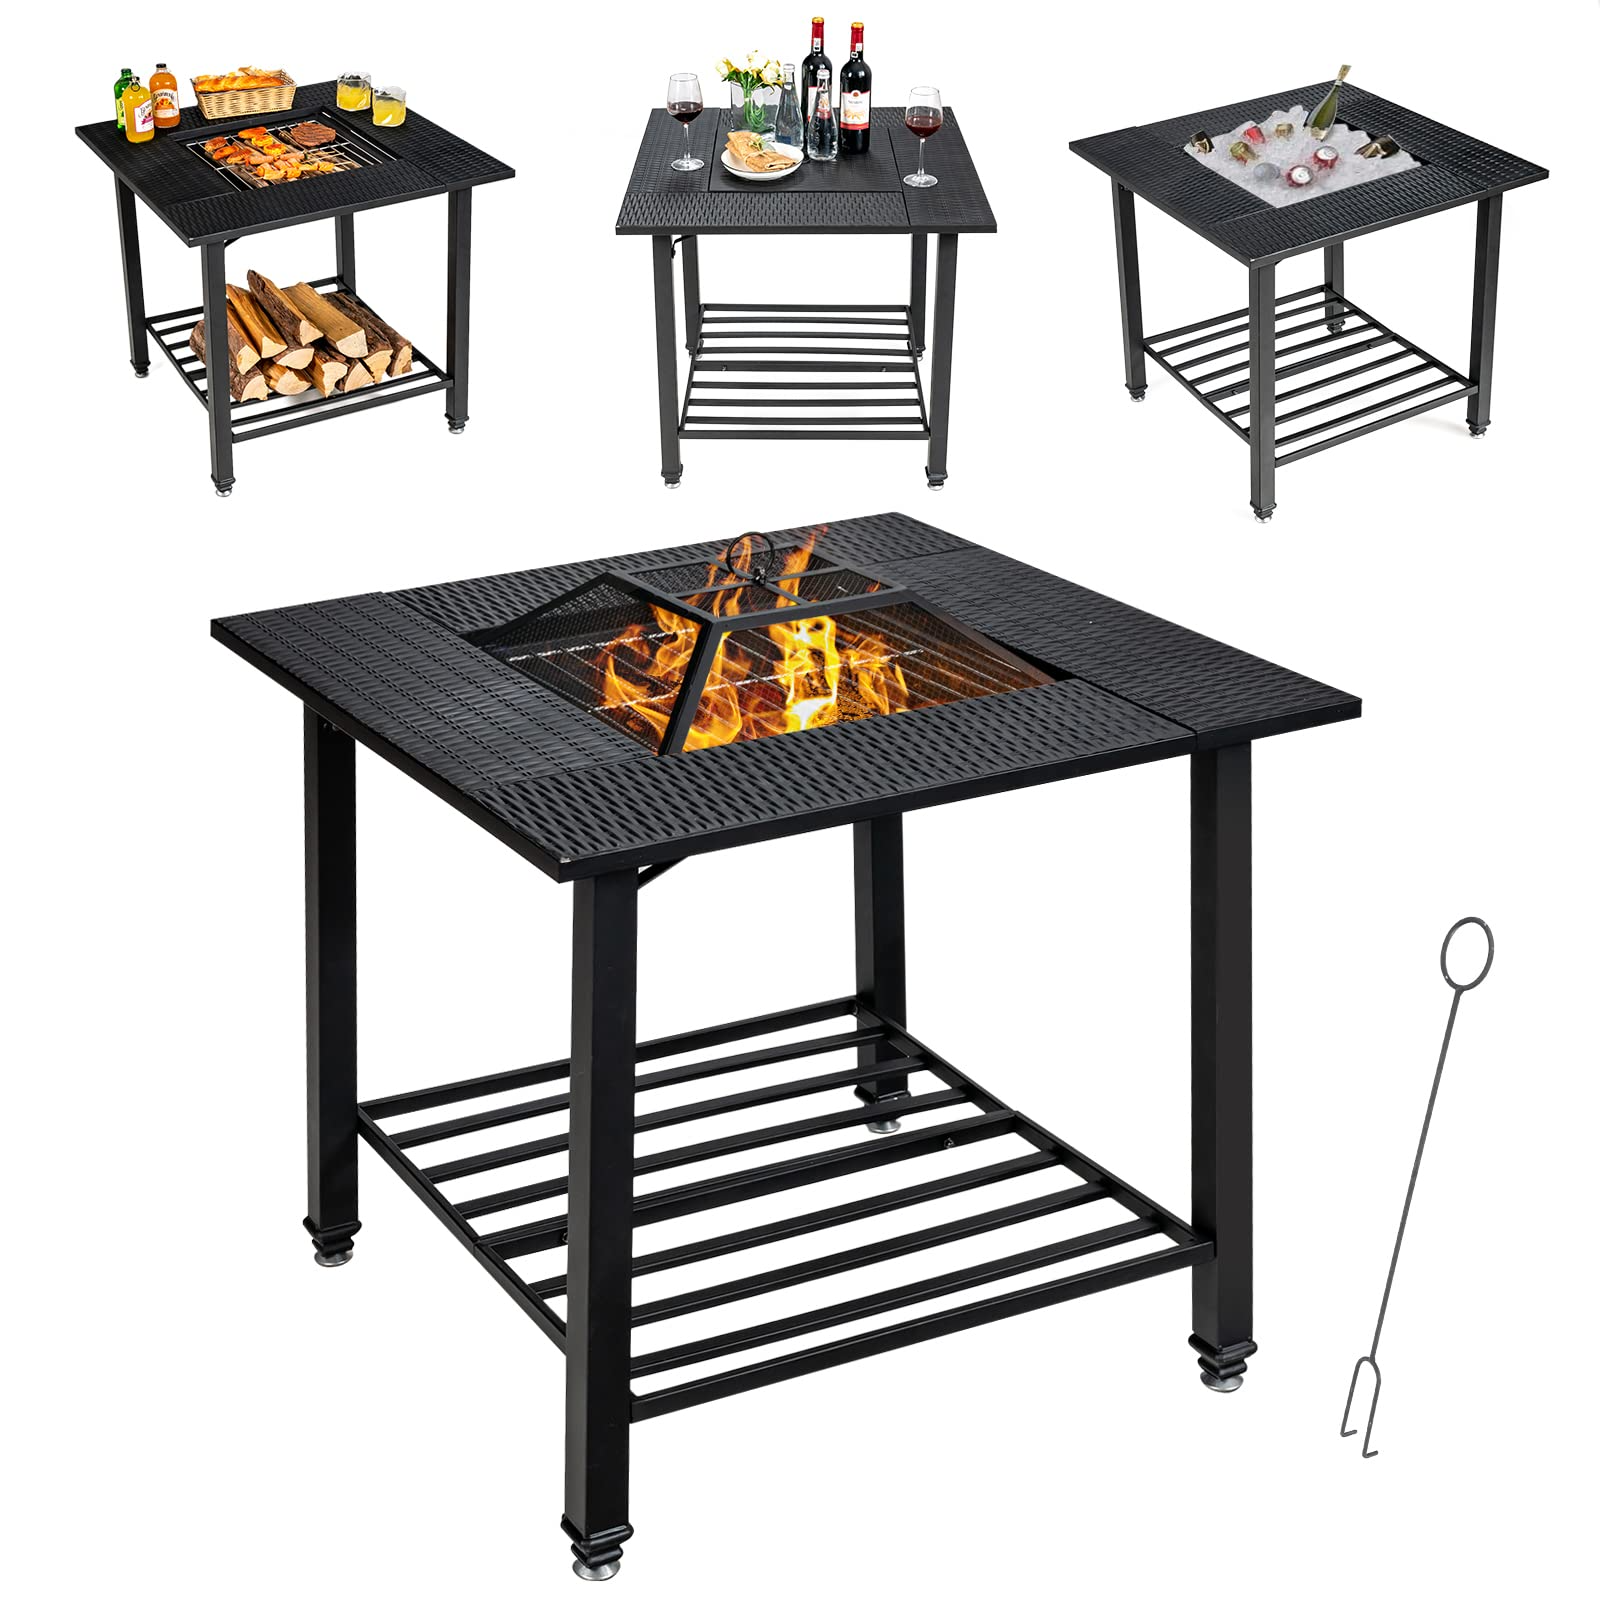 4-in-1 Wood Burning Fire Pit, Square Firepit Table with Mesh Cover